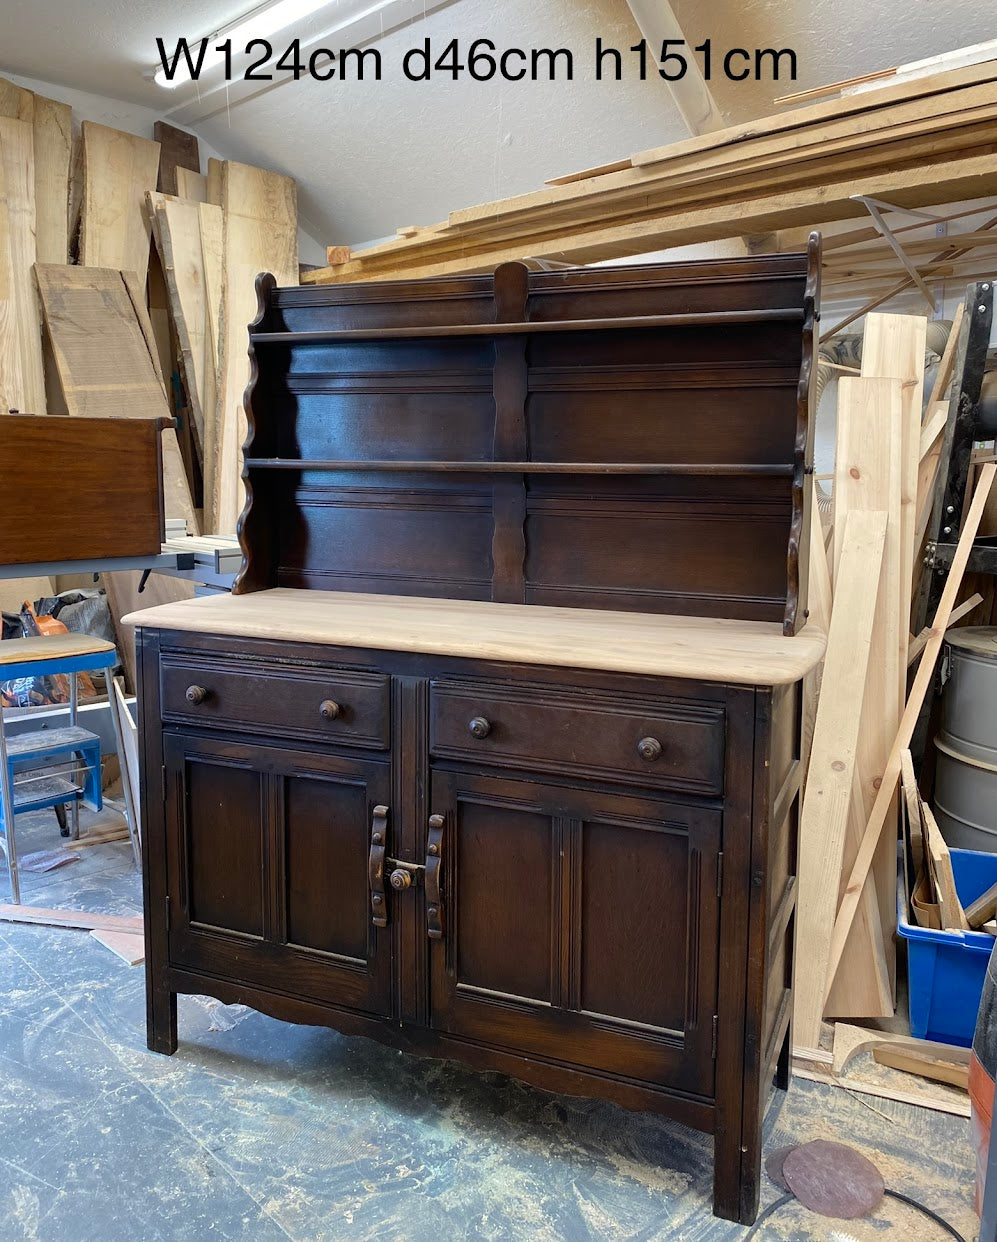 The dresser is shown here in our workshop, with the top stripped of its dark finish to reveal the grain of the wood. We have then sealed it with oil to protect.